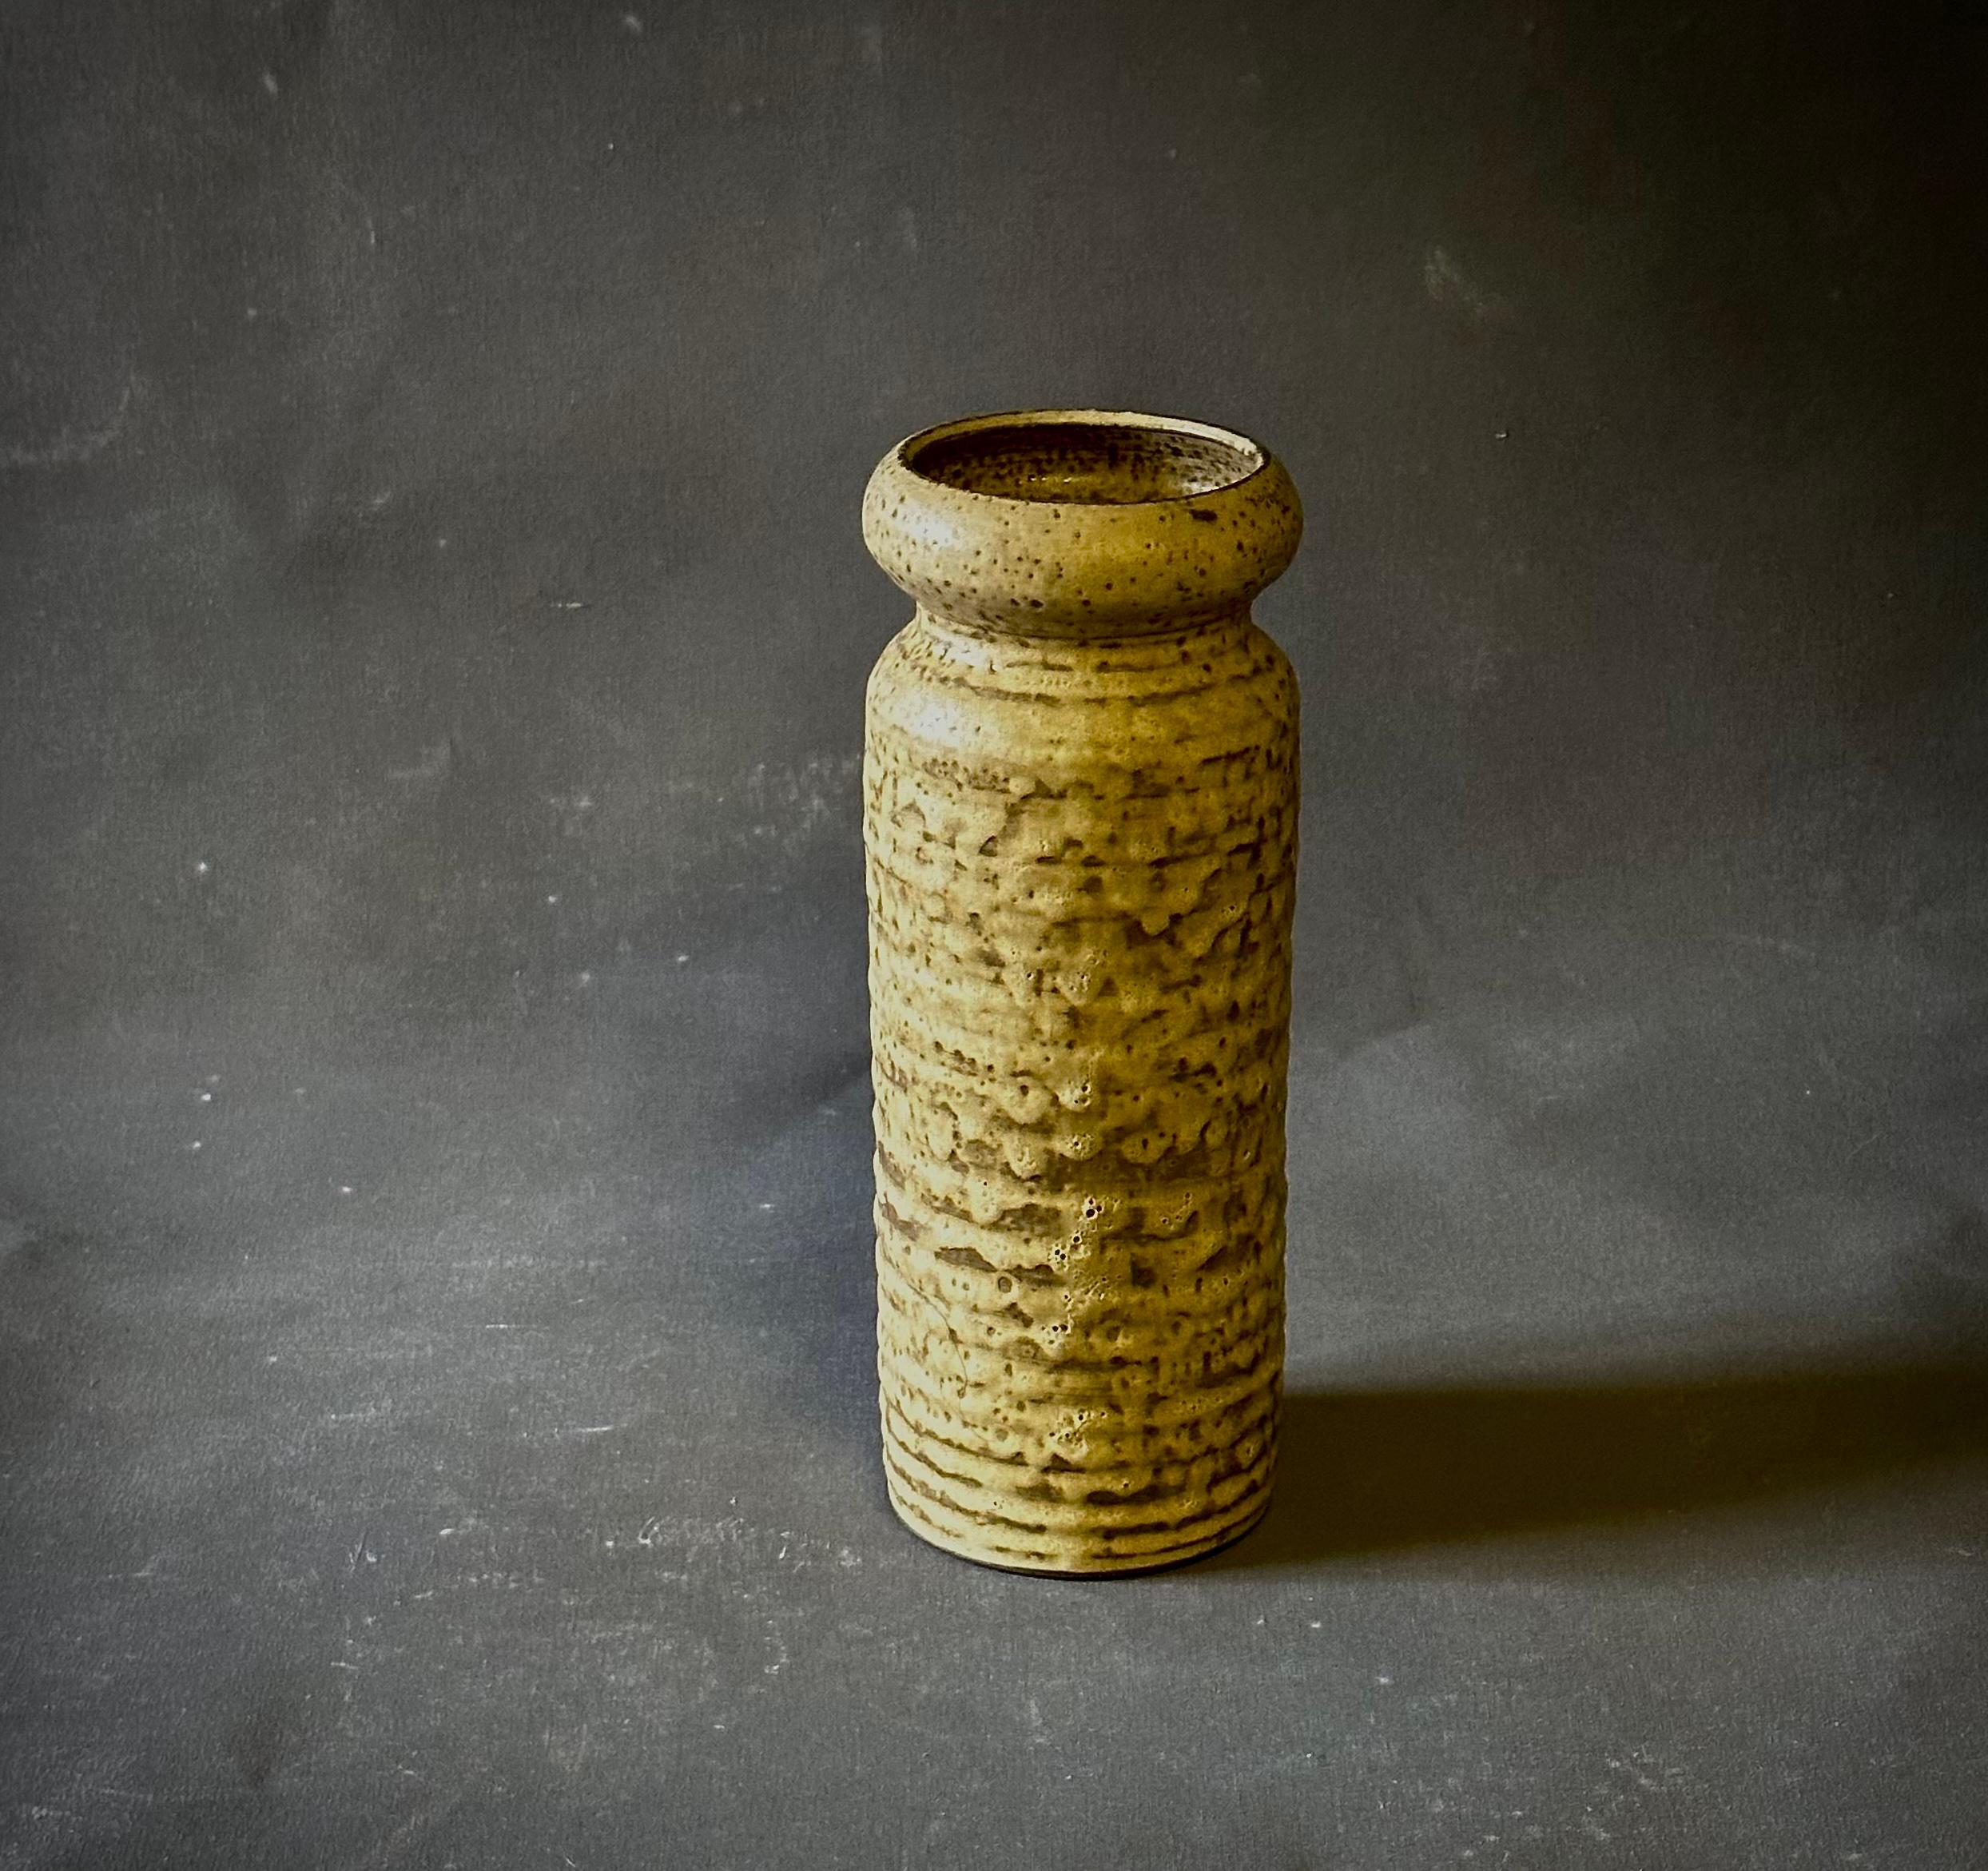 1960s Belgian textured and glazed ceramic vessel or vase in shades of golds, yellows, and browns. Would work well displayed individually or among others as part of a group. A sunny, understated piece with beautiful proportions and an exquisite